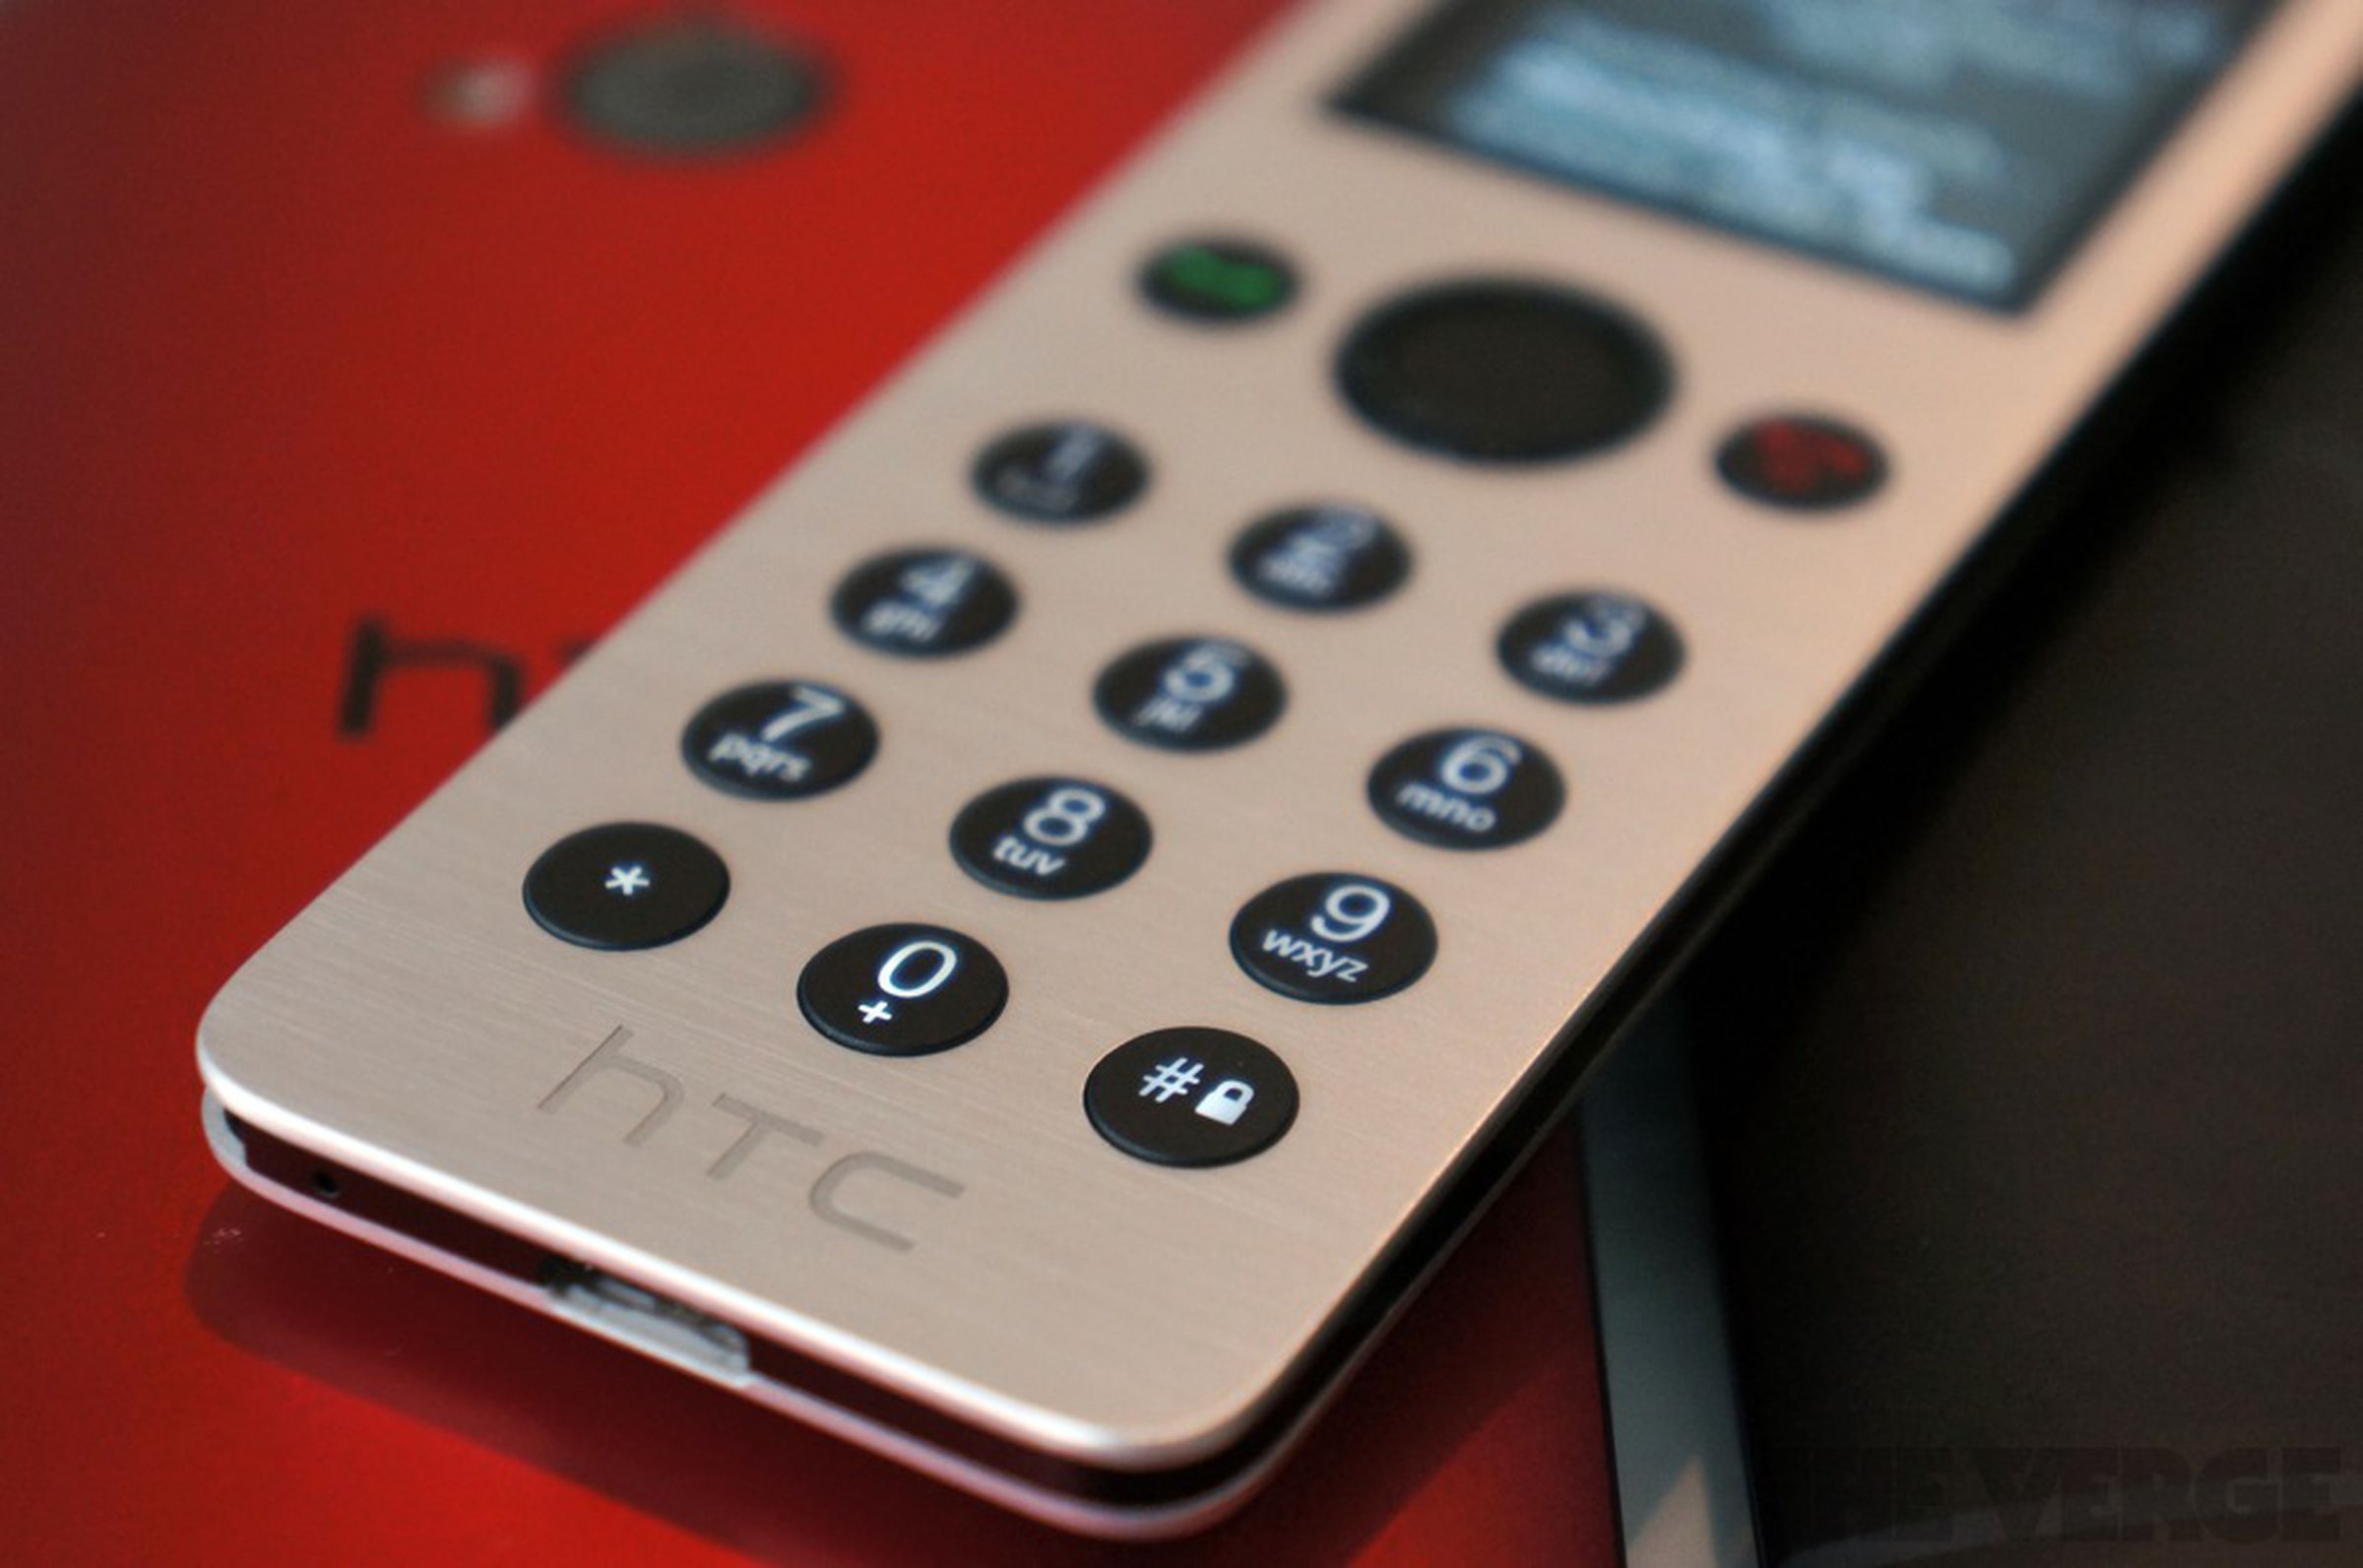 HTC Mini+ and Fetch hands-on gallery